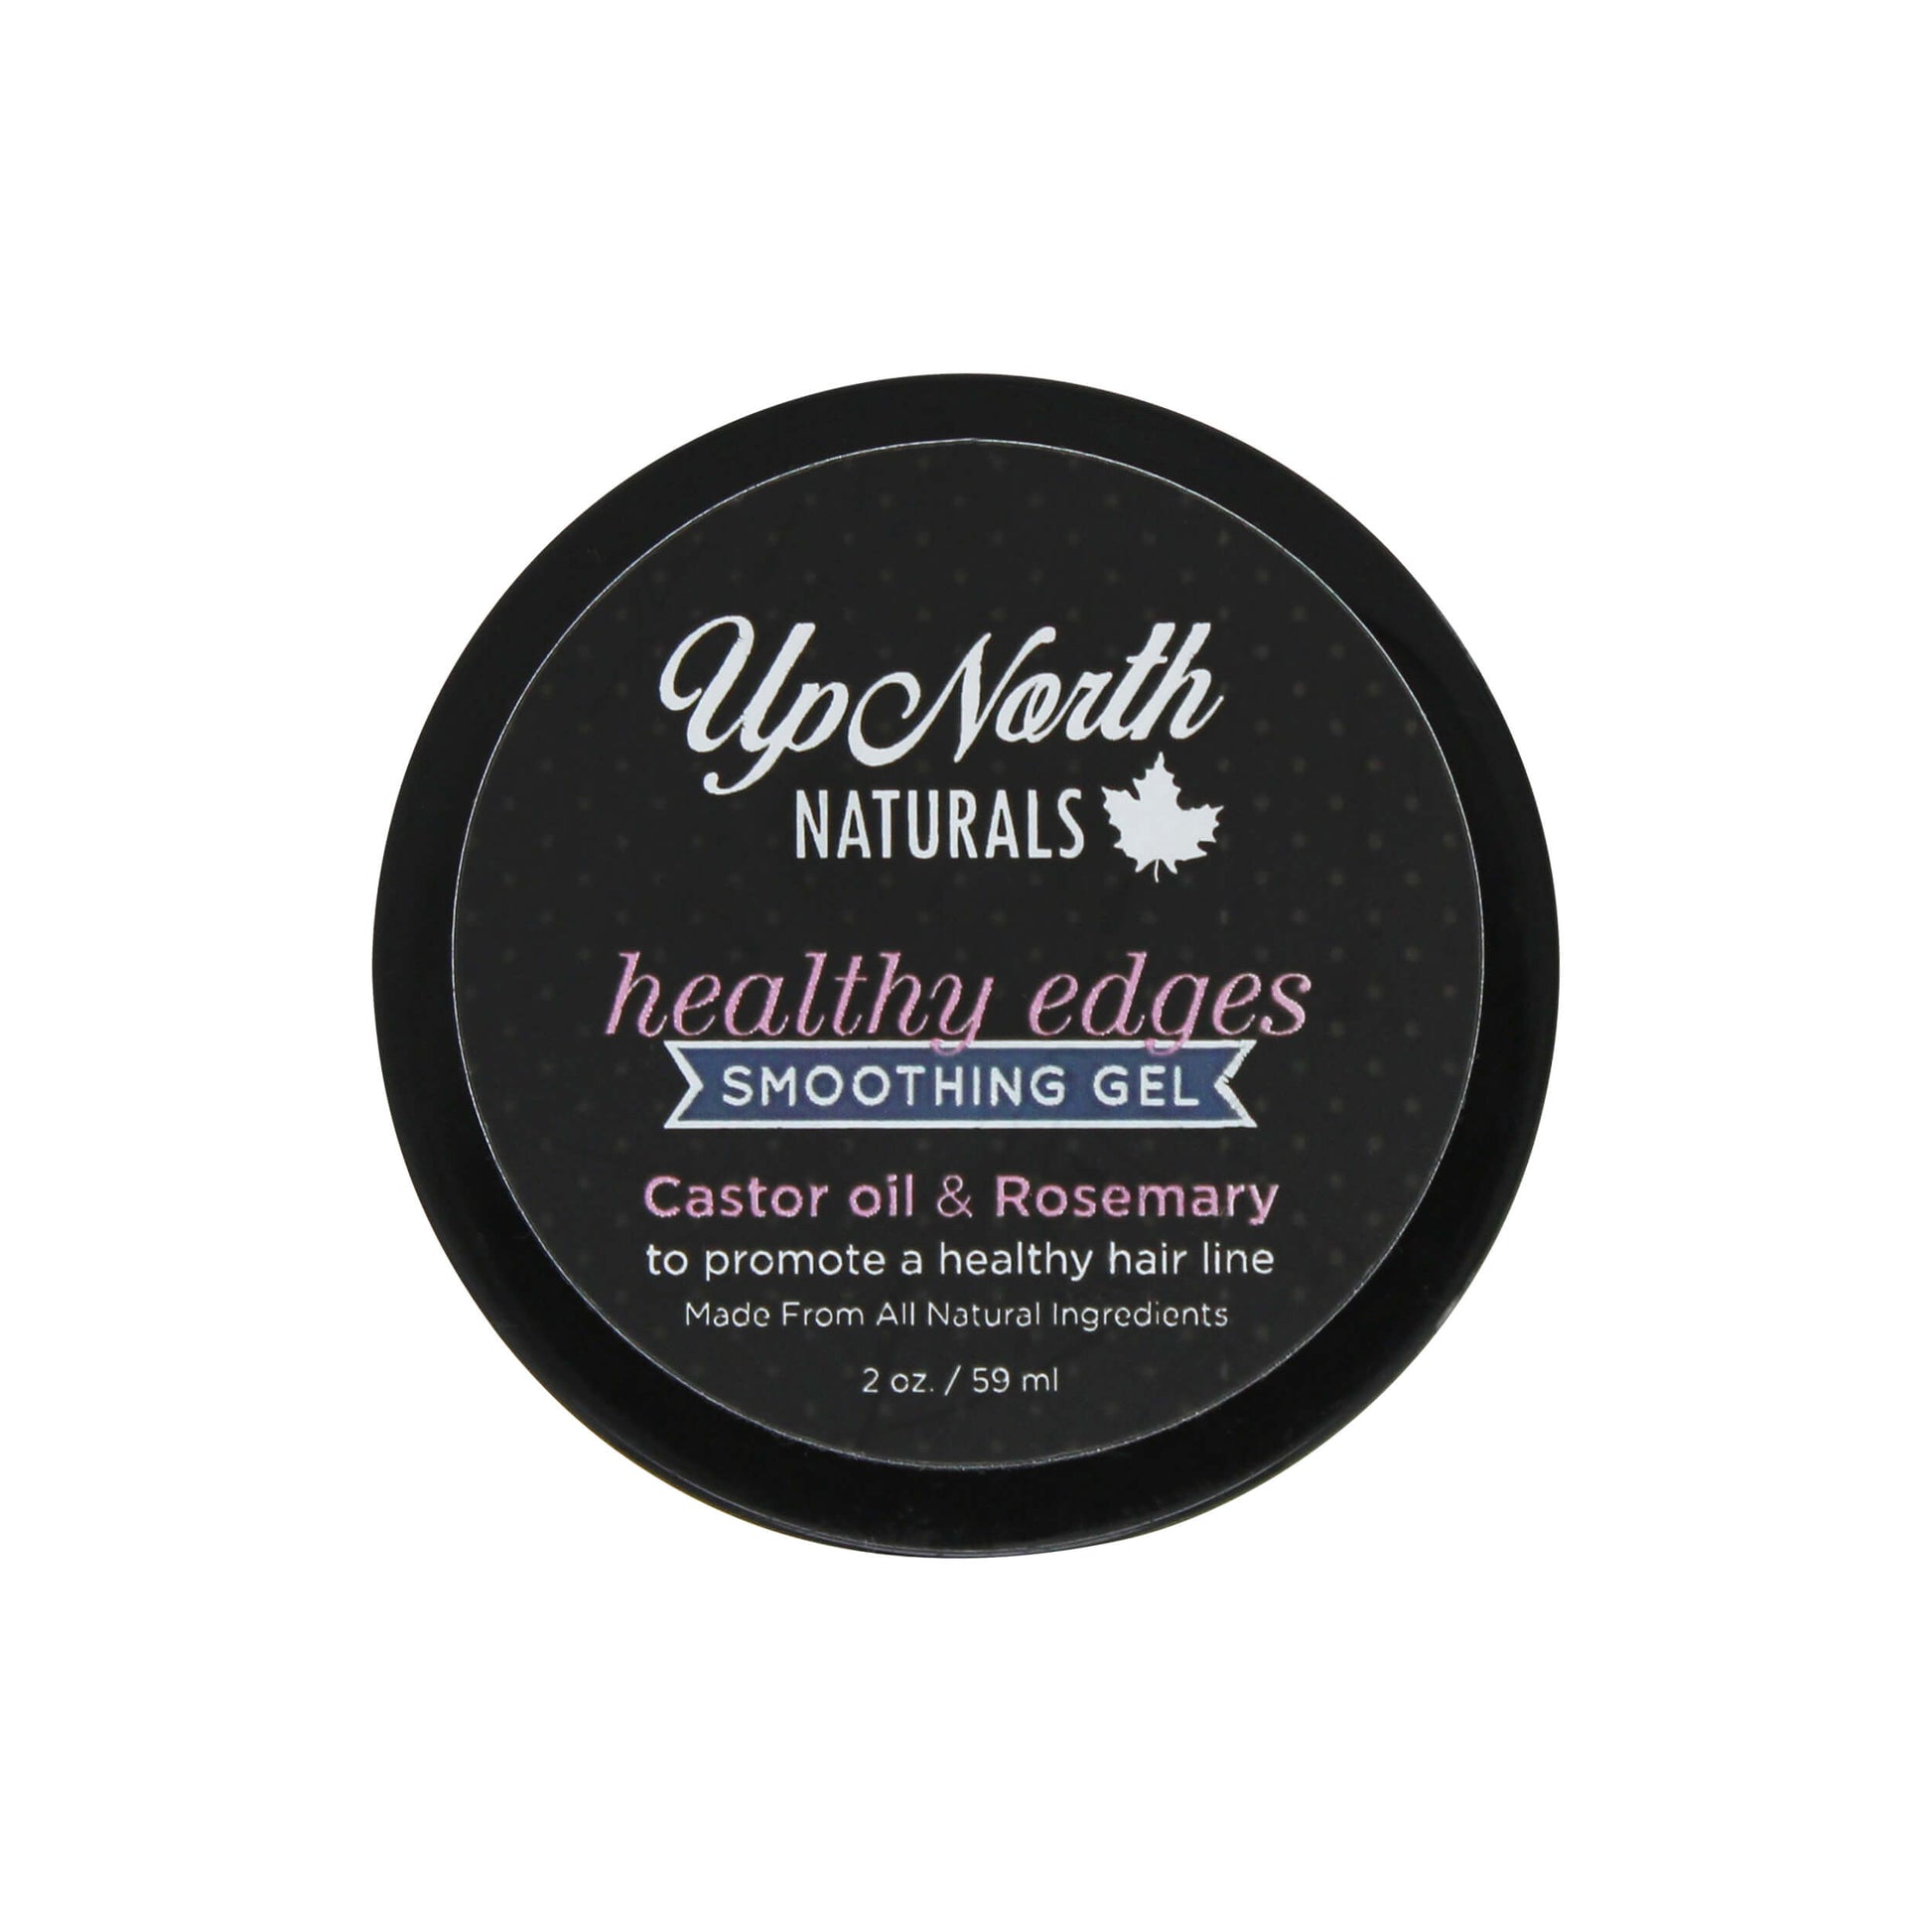 Healthy Edges Smoothing Gel – Up North Naturals